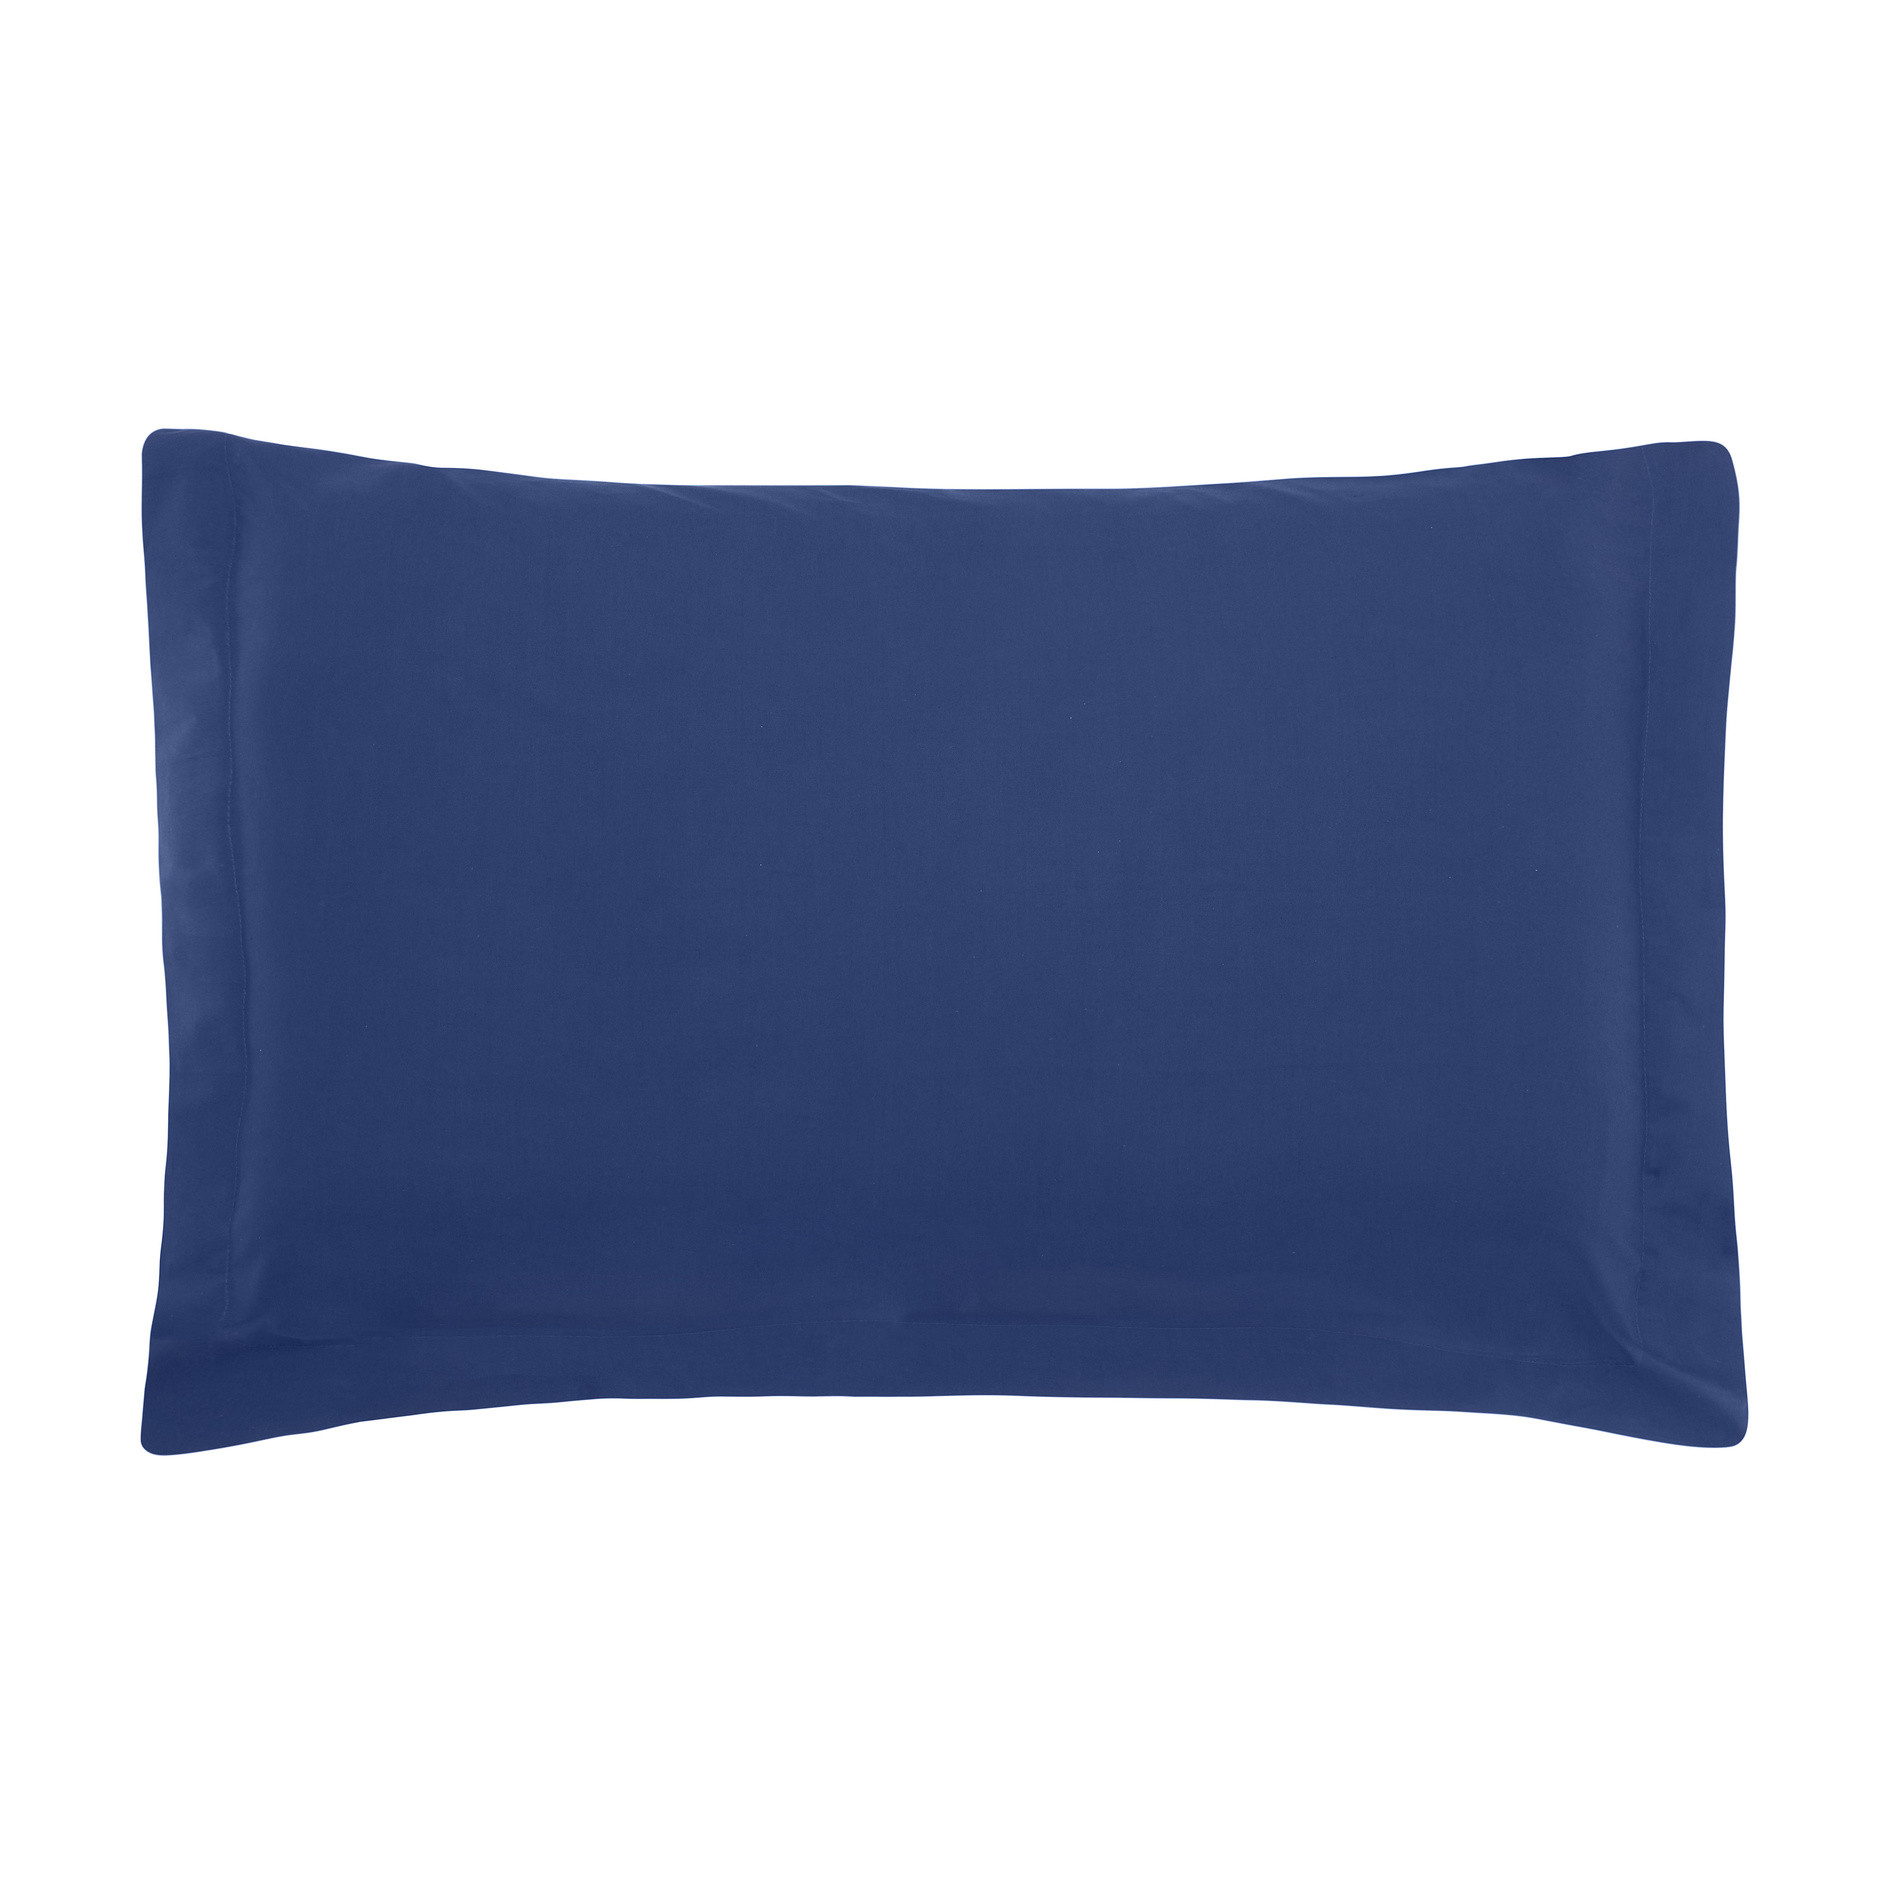 Zefiro solid colour pillowcase in percale., Blue, large image number 0